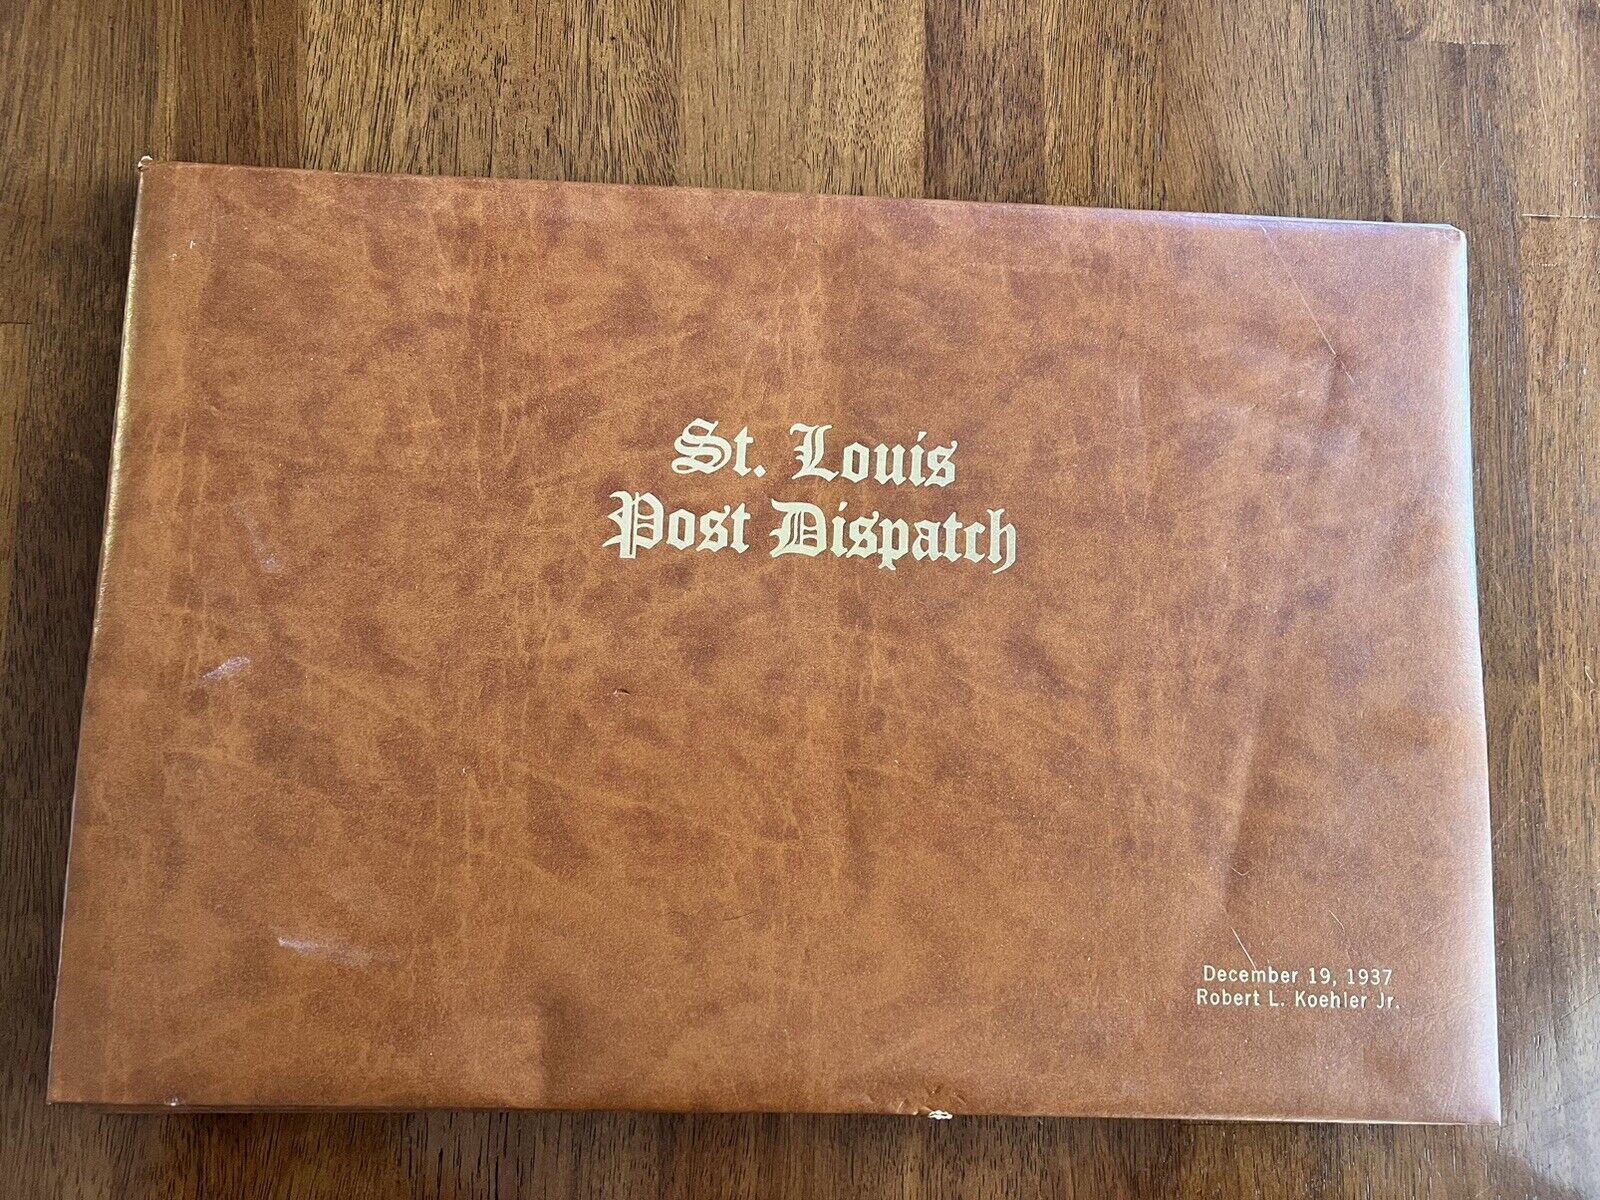 VINTAGE St. LUIS DISPATCH NEWSPAPER FROM DECEMBER 19 1937 WITH CERTIFICATE